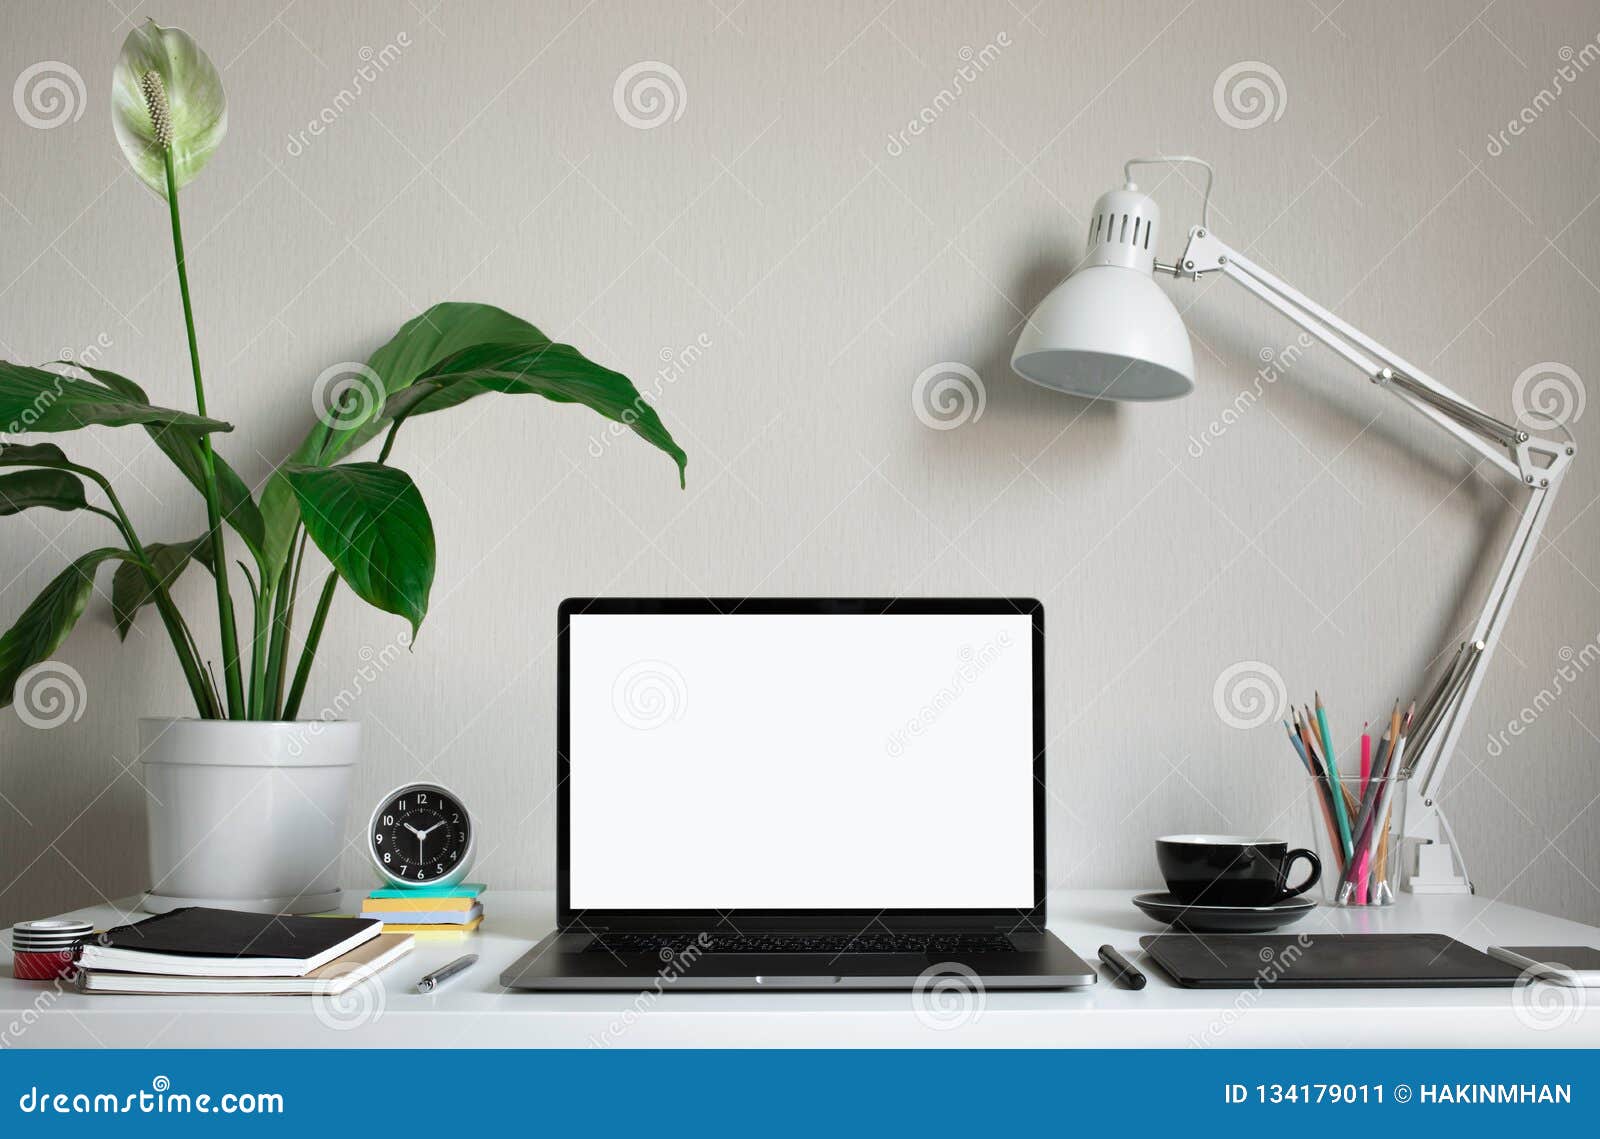 327,290 Modern Work Home Stock Photos - Free & Royalty-Free Stock Photos  from Dreamstime